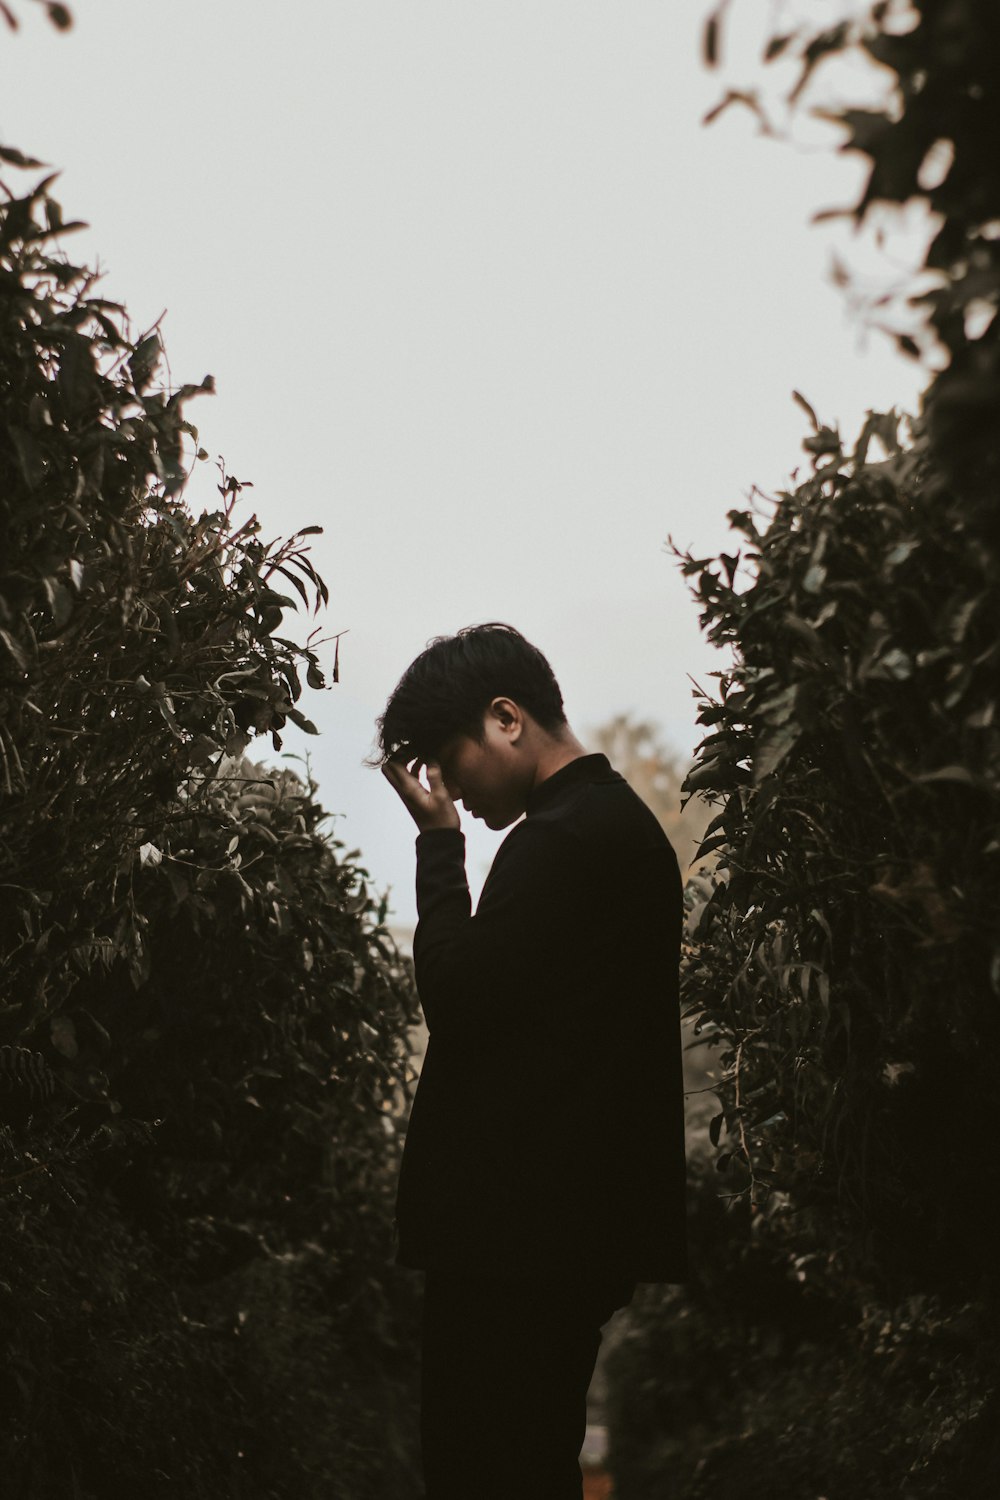 man in black suit standing near green plants during daytime